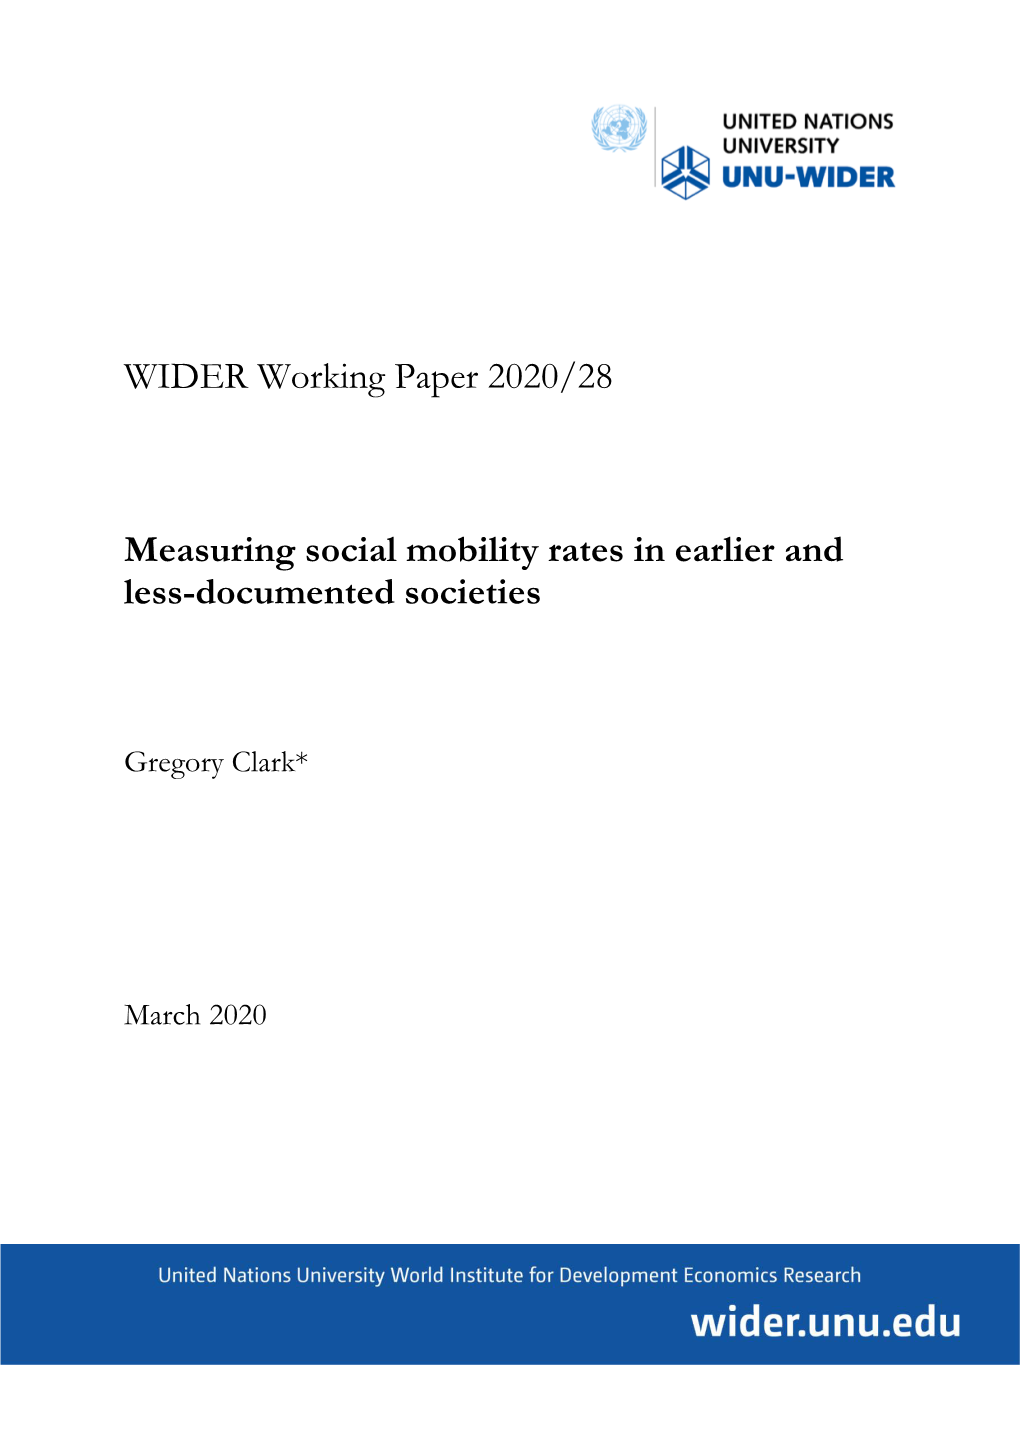 WIDER Working Paper 2020/28-Measuring Social Mobility